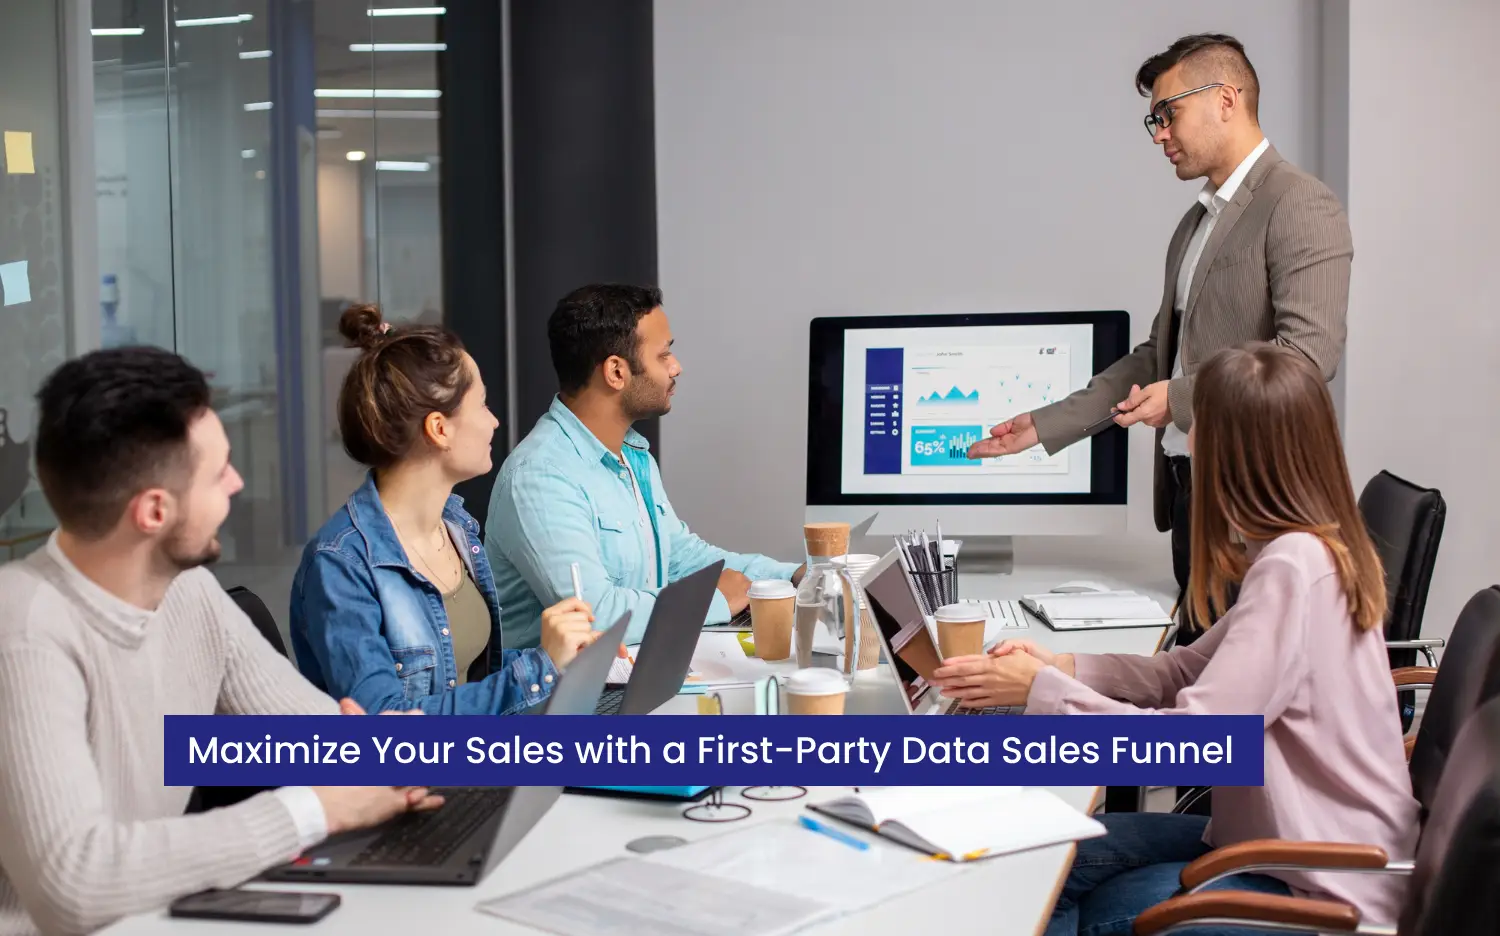 Maximize Your Sales with a First-Party Data Sales Funnel